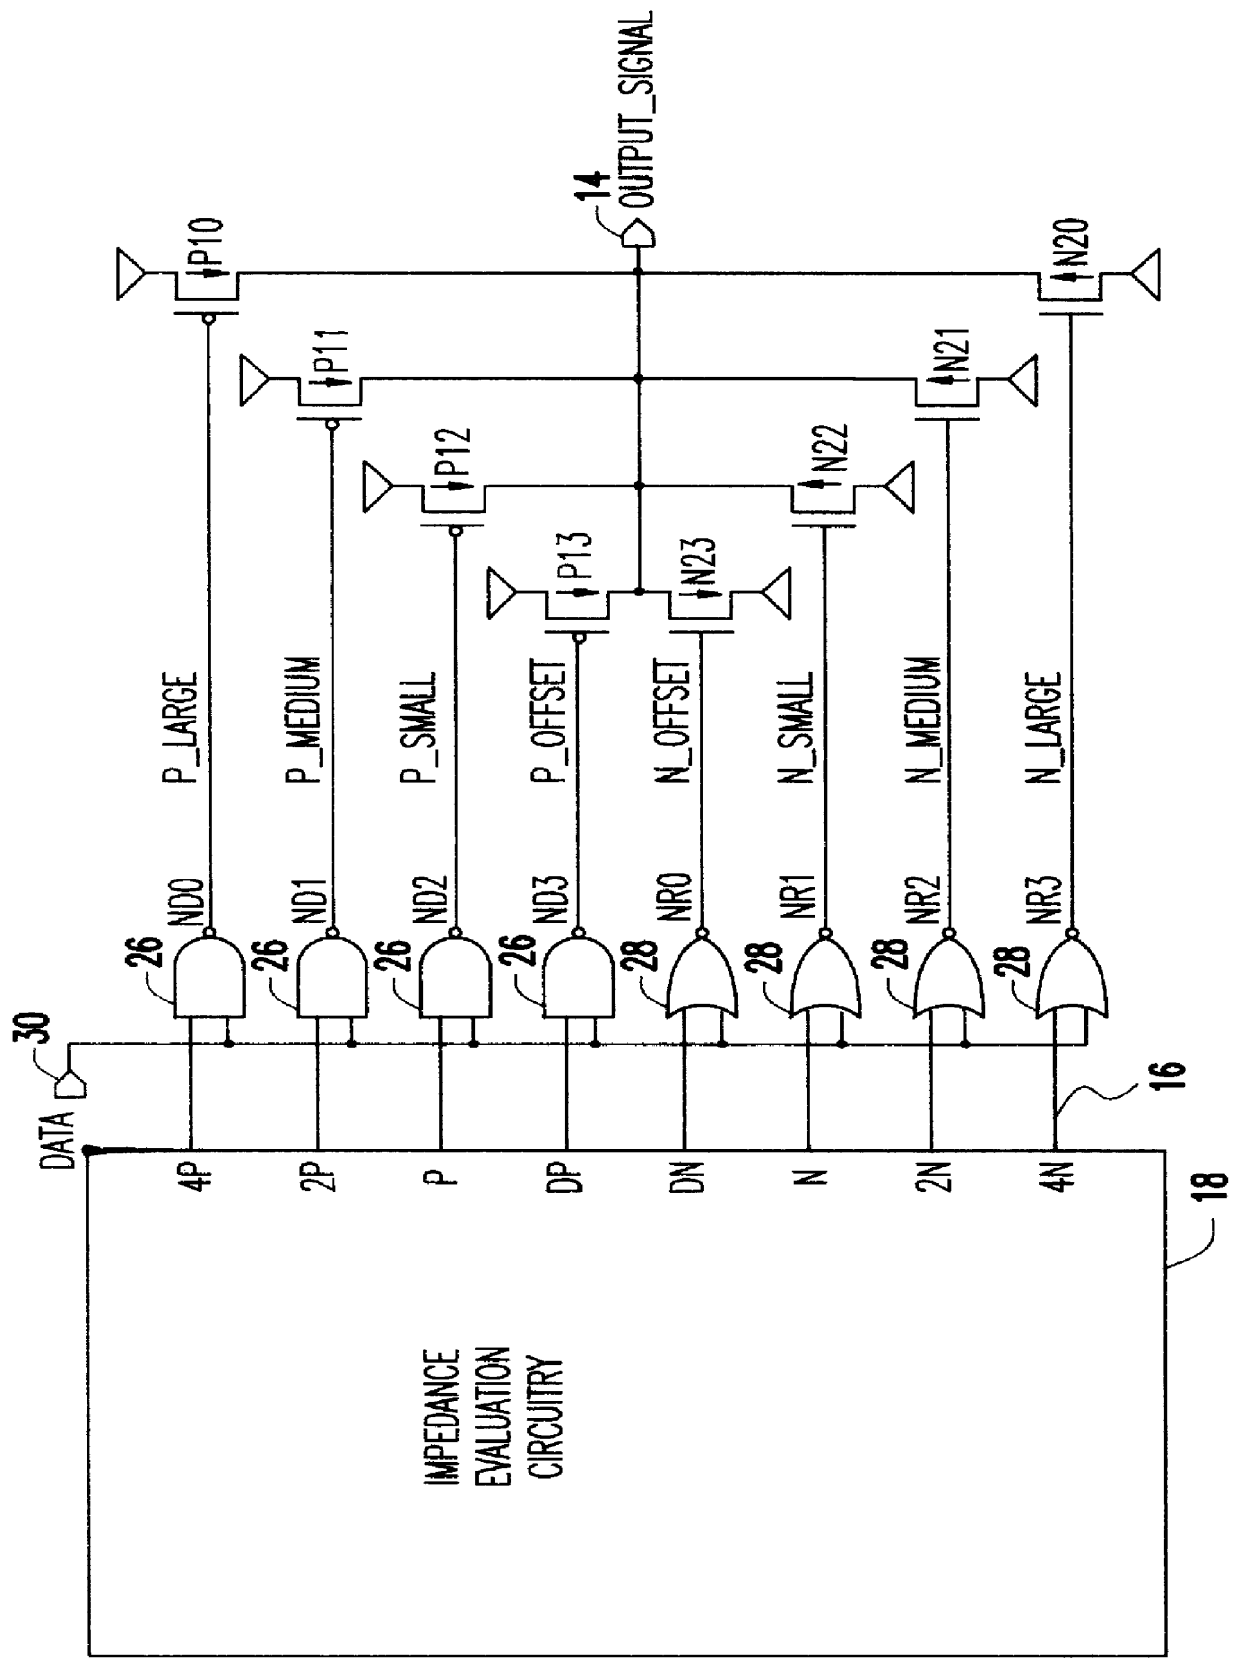 Variable impedance output driver circuit using analog biases to match driver output impedance to load input impedance